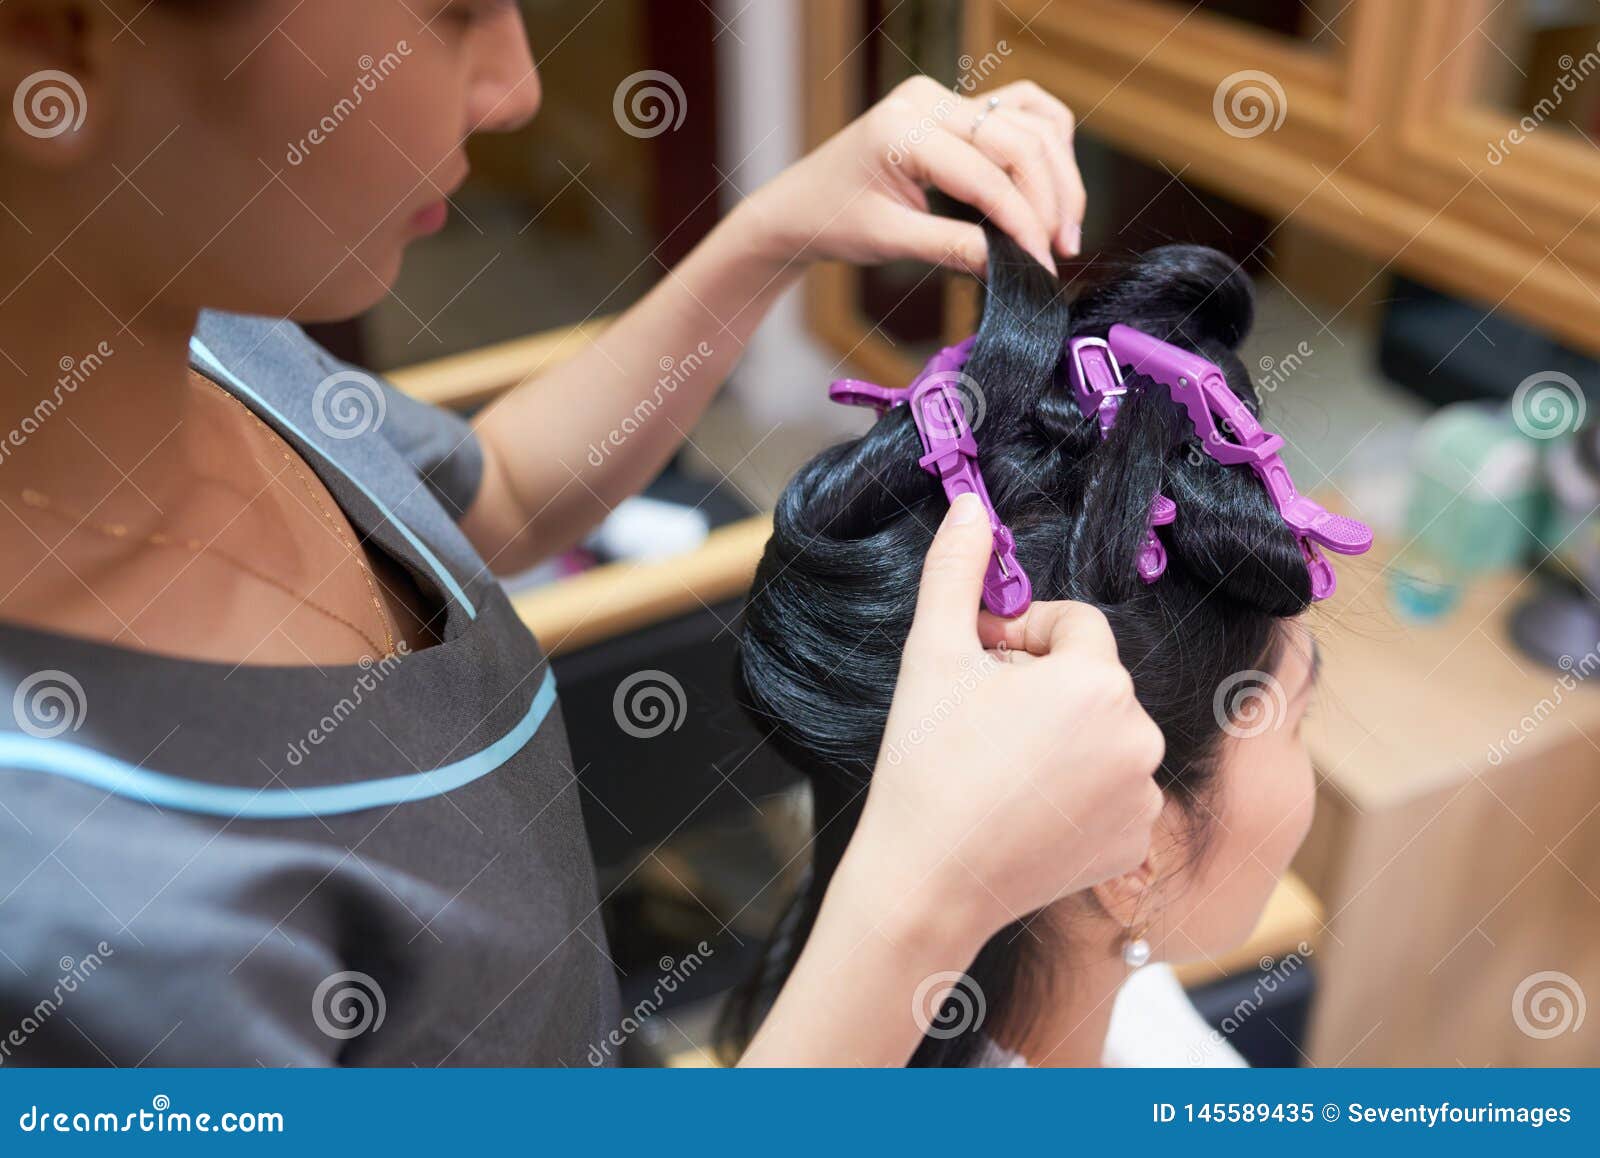 Using Alligator Hair Clips While Cutting Hair Stock Image Image